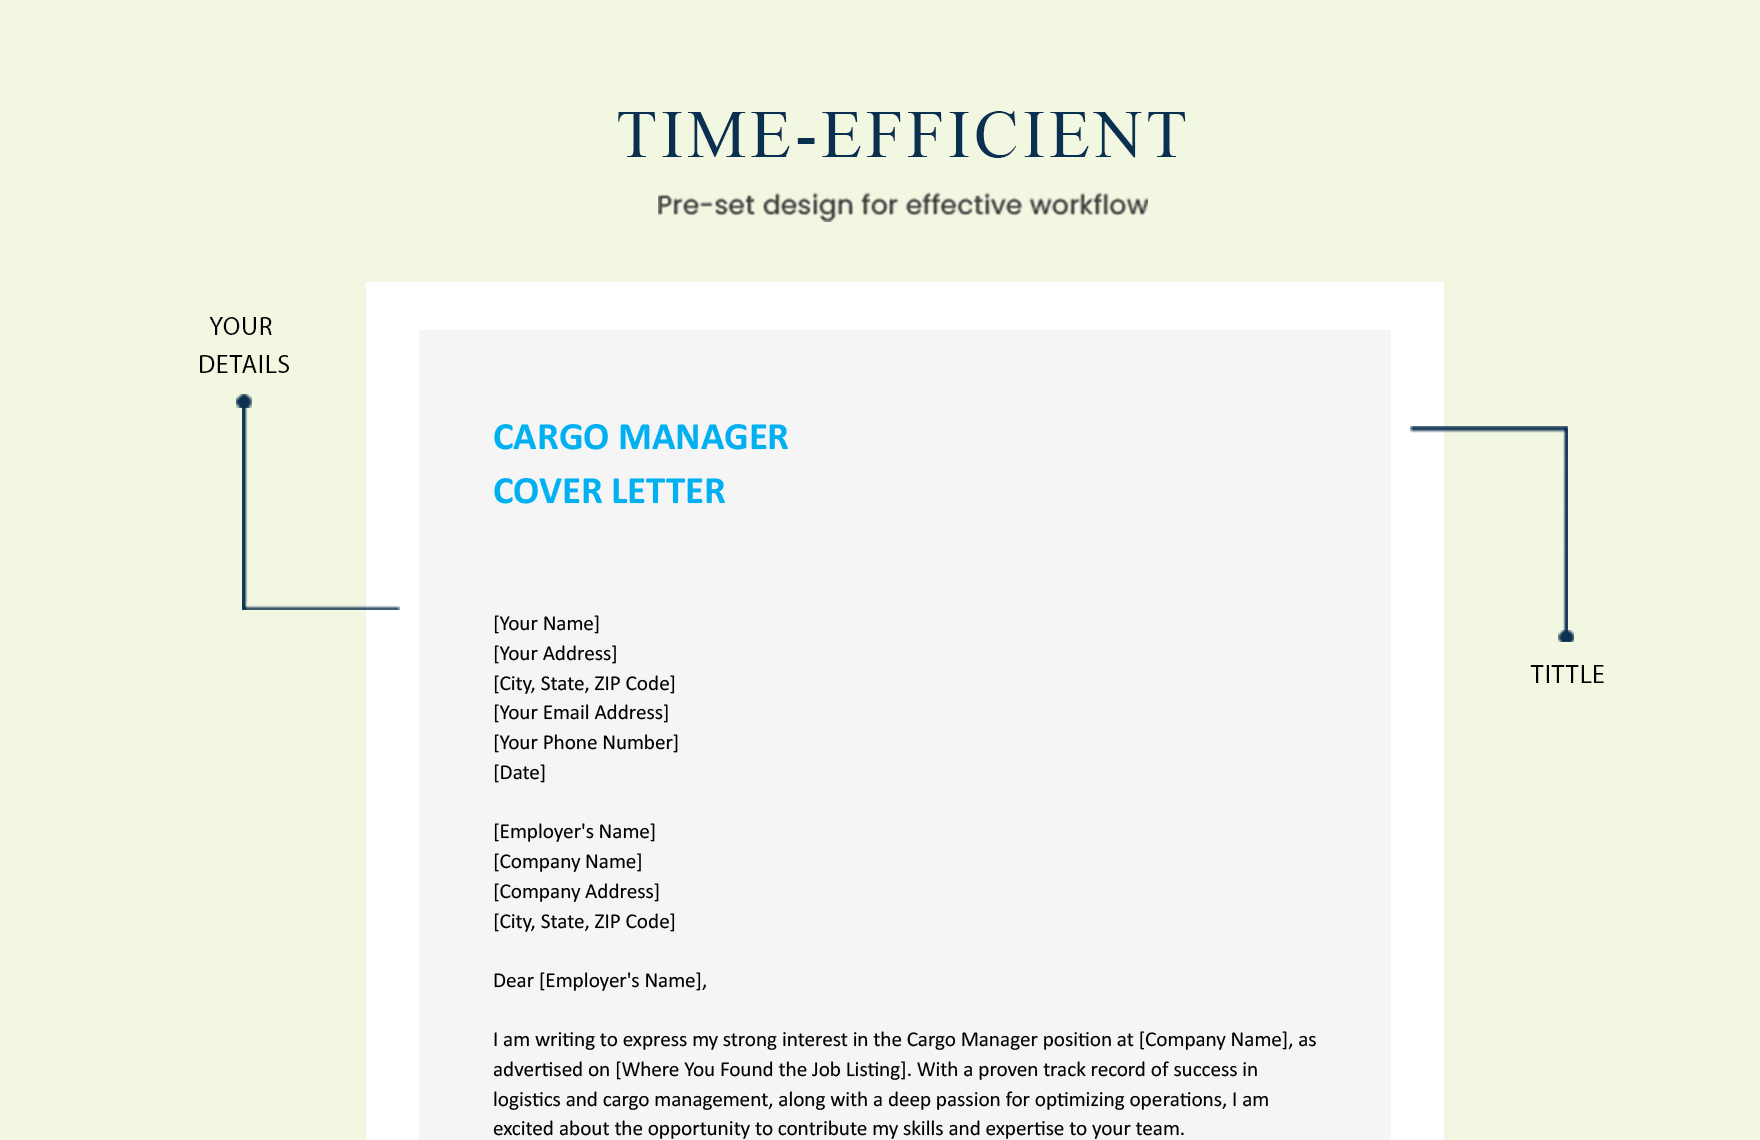 Cargo Manager Cover Letter